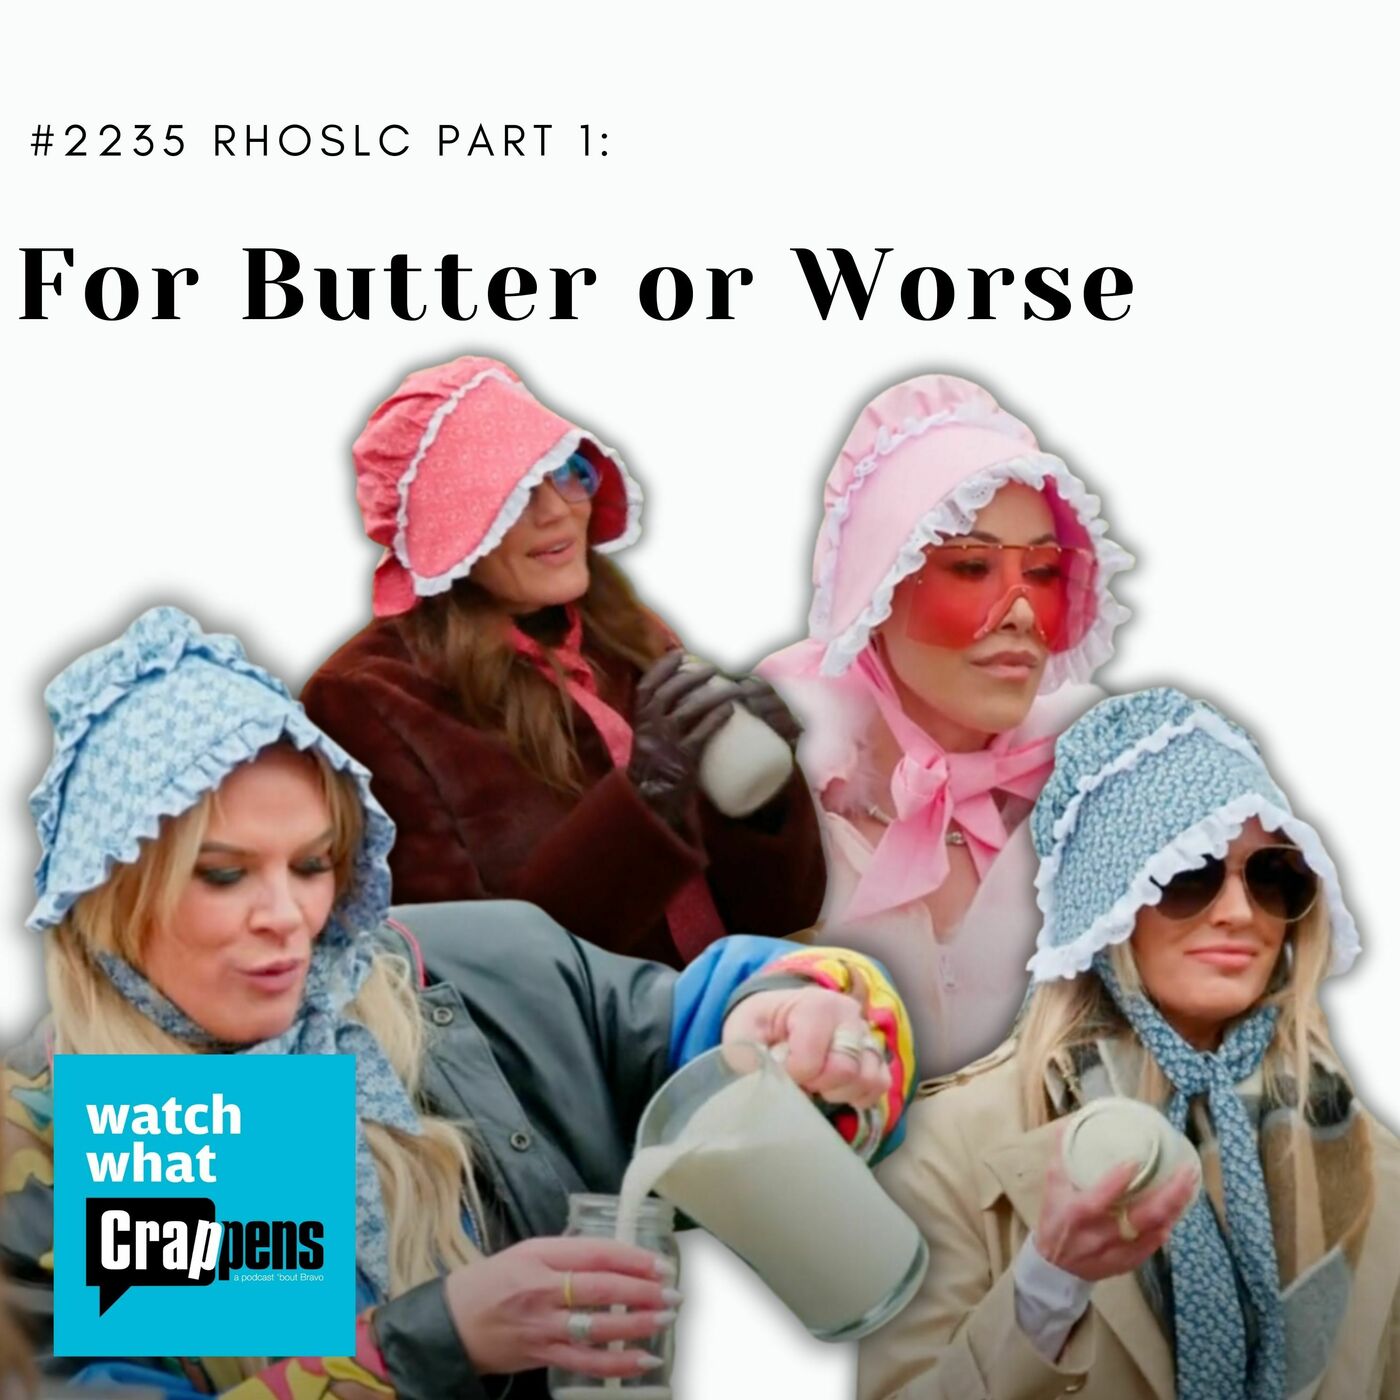 #2235 RHOSLC Part 1: For Butter or Worse